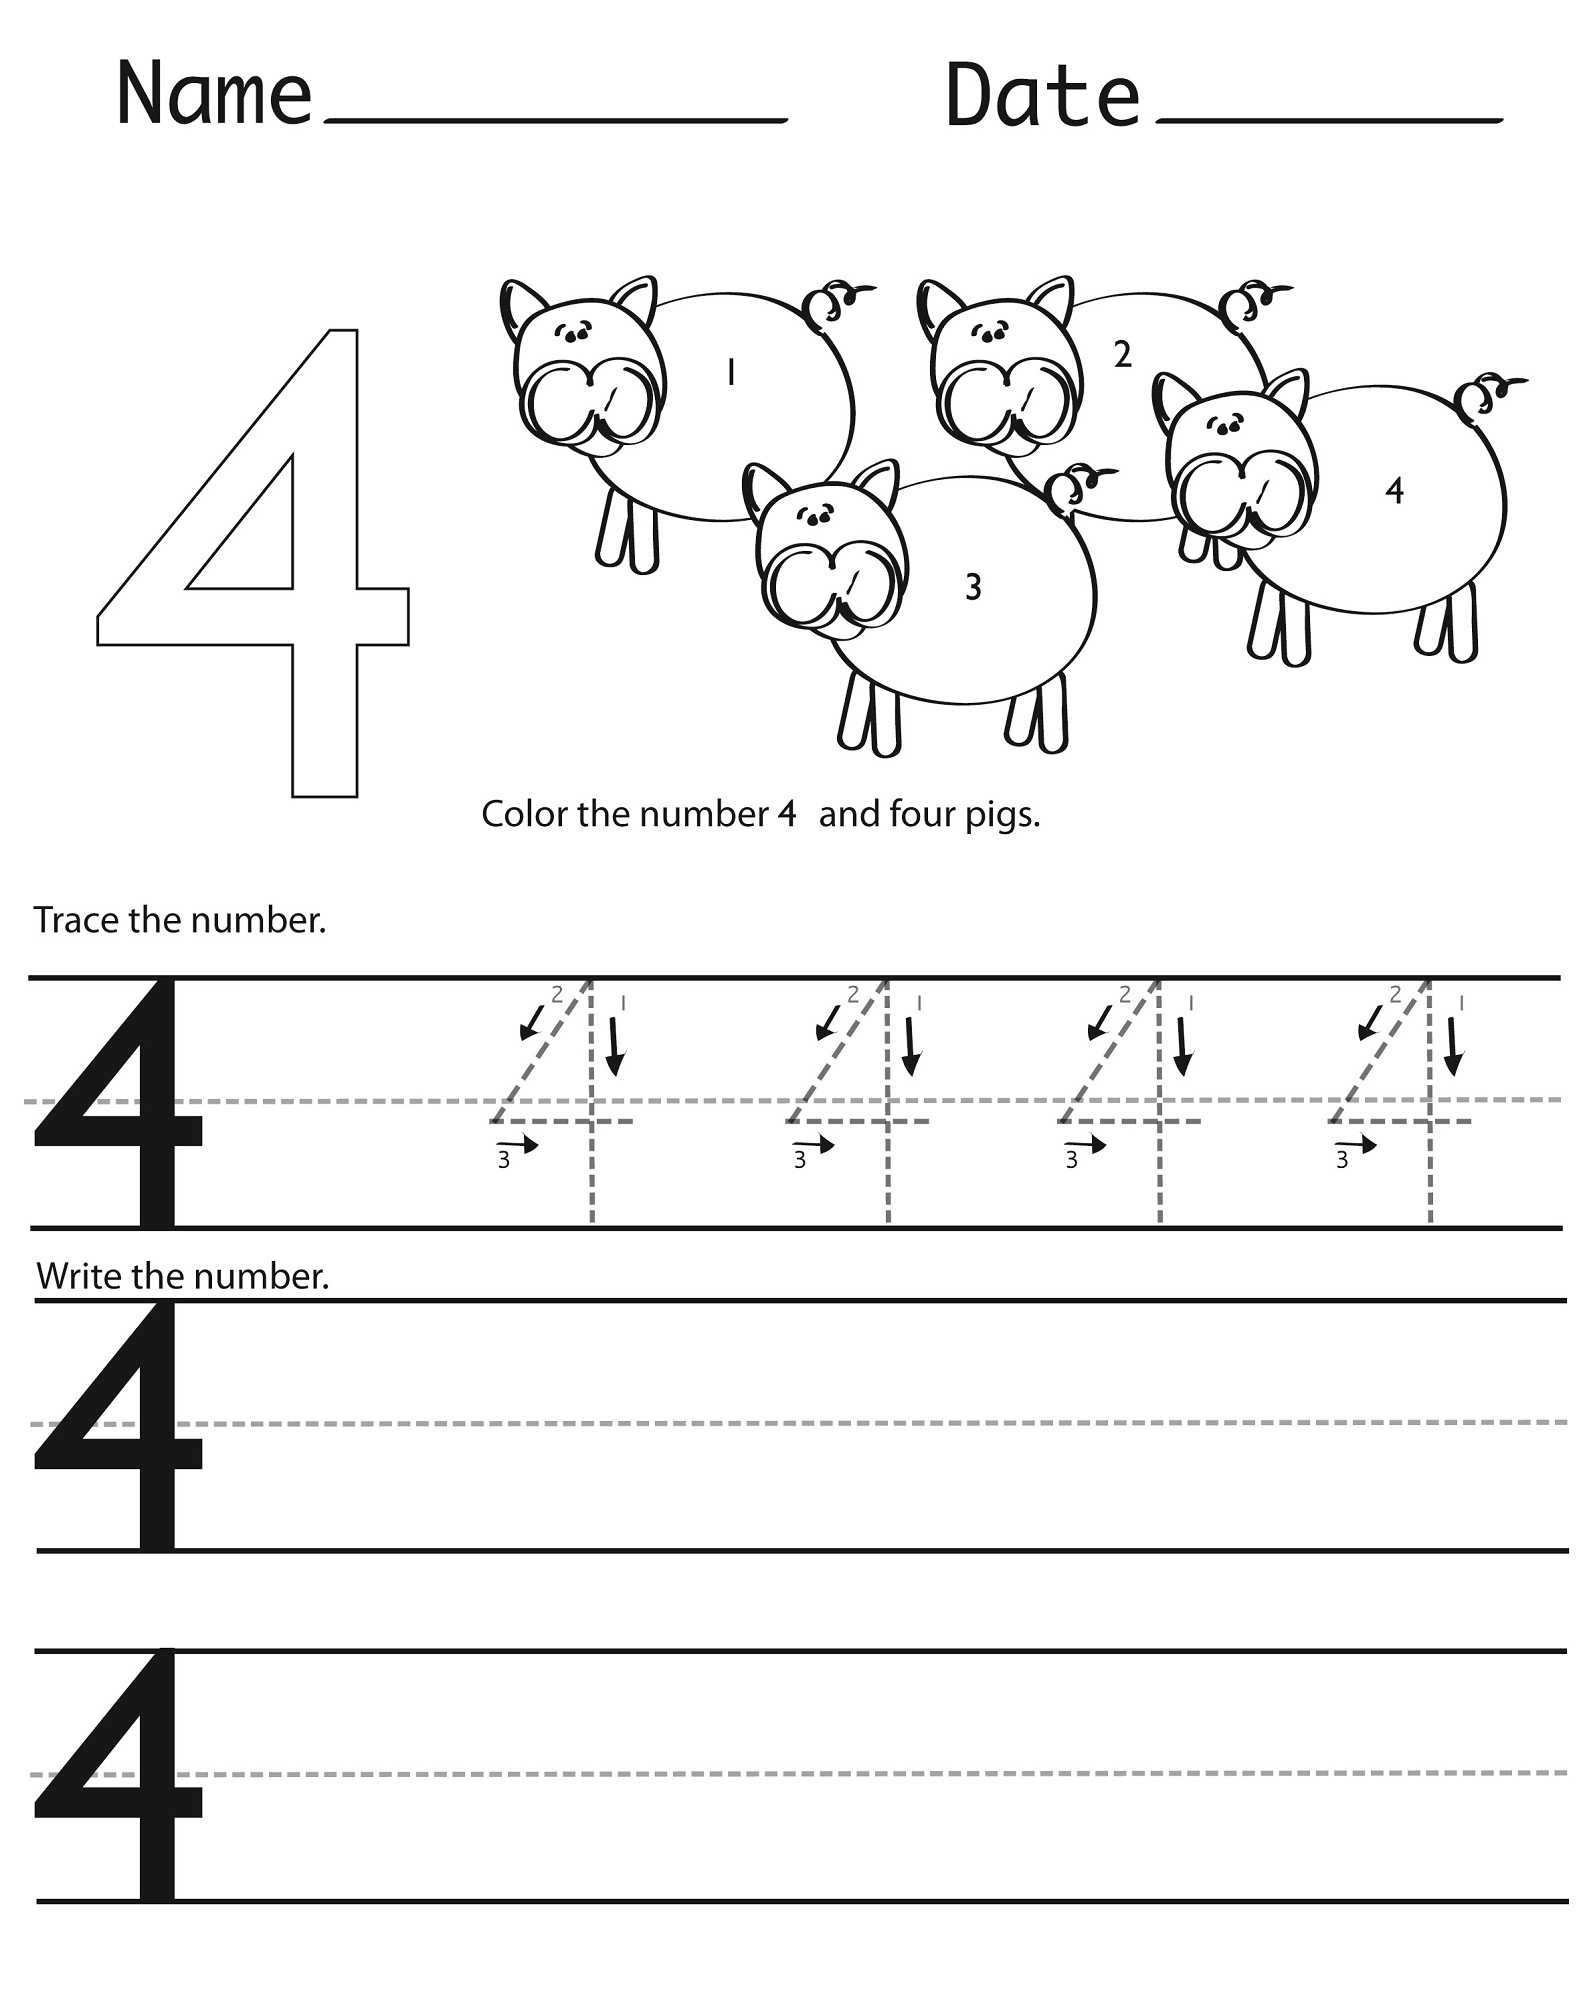 Note Reading Worksheets or Worksheet Kids Awesome S Media Cache Ak0 Pinimg 564x 2c 0d E8